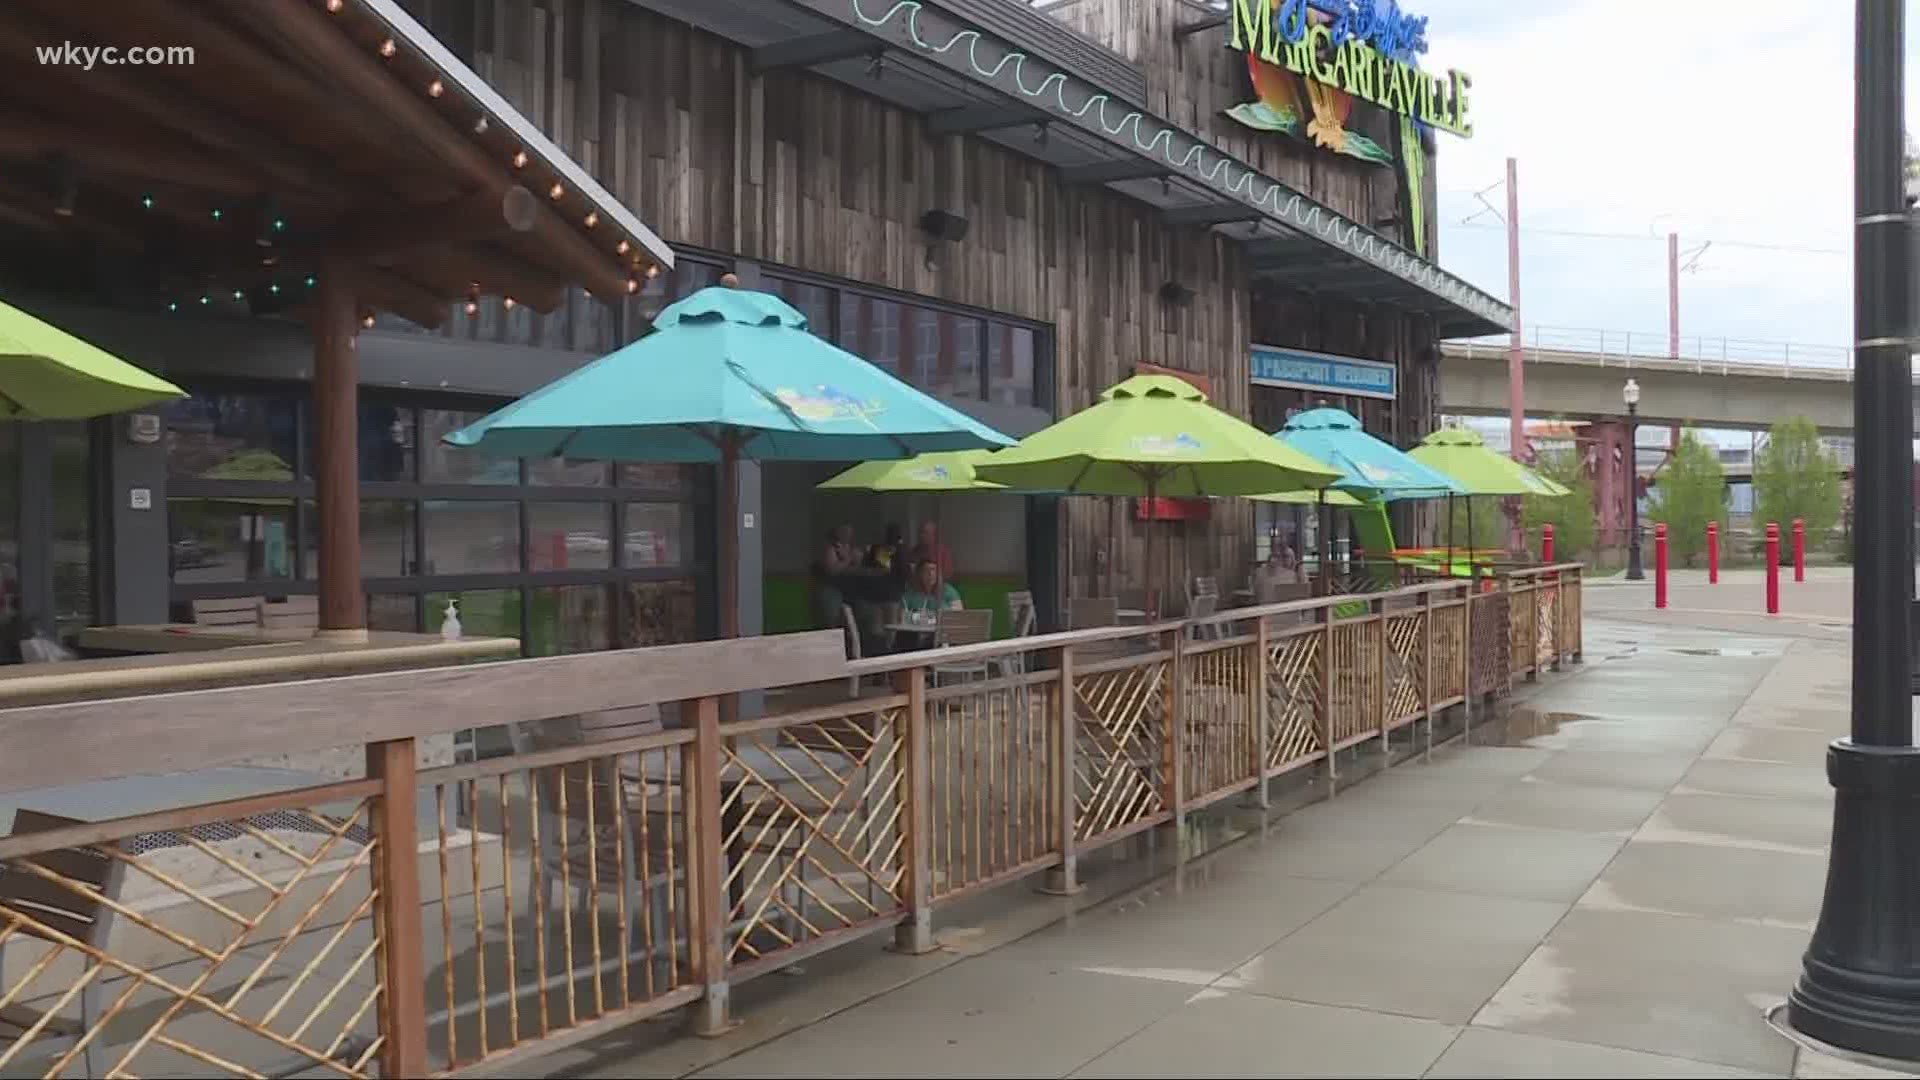 Despite some rainy weather in Northeast Ohio, several people headed out to their favorite restaurants to enjoy outdoor dining. Did they feel safe?